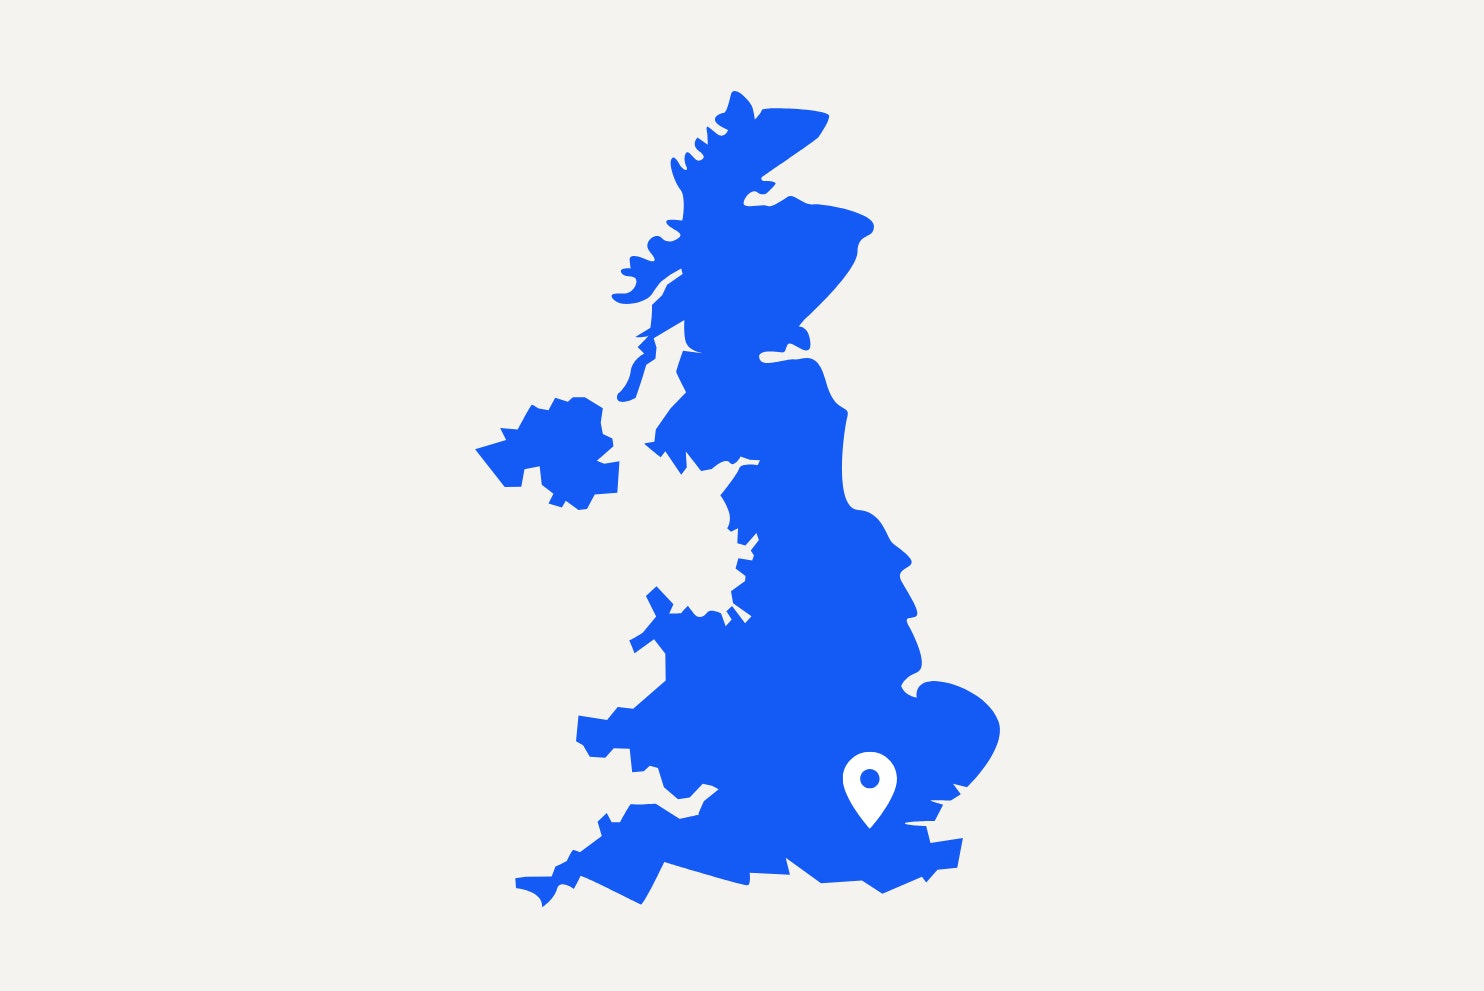 Map of UK with Flip locations